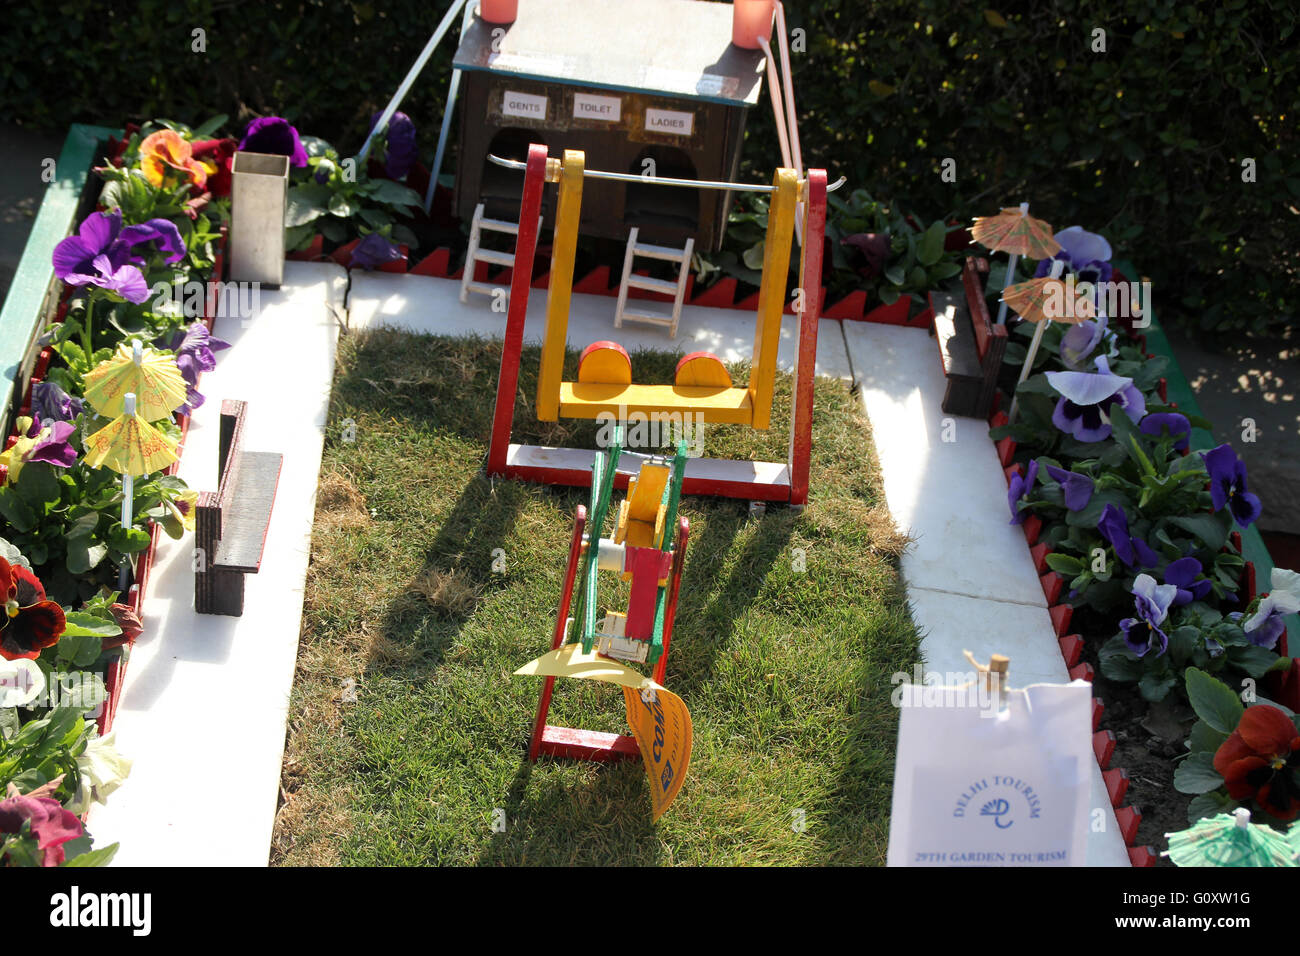 Mini garden on a cart displayed at Garden Festival, complete with lawn, swings, umbrellas, foliage plants and garden annuals Stock Photo